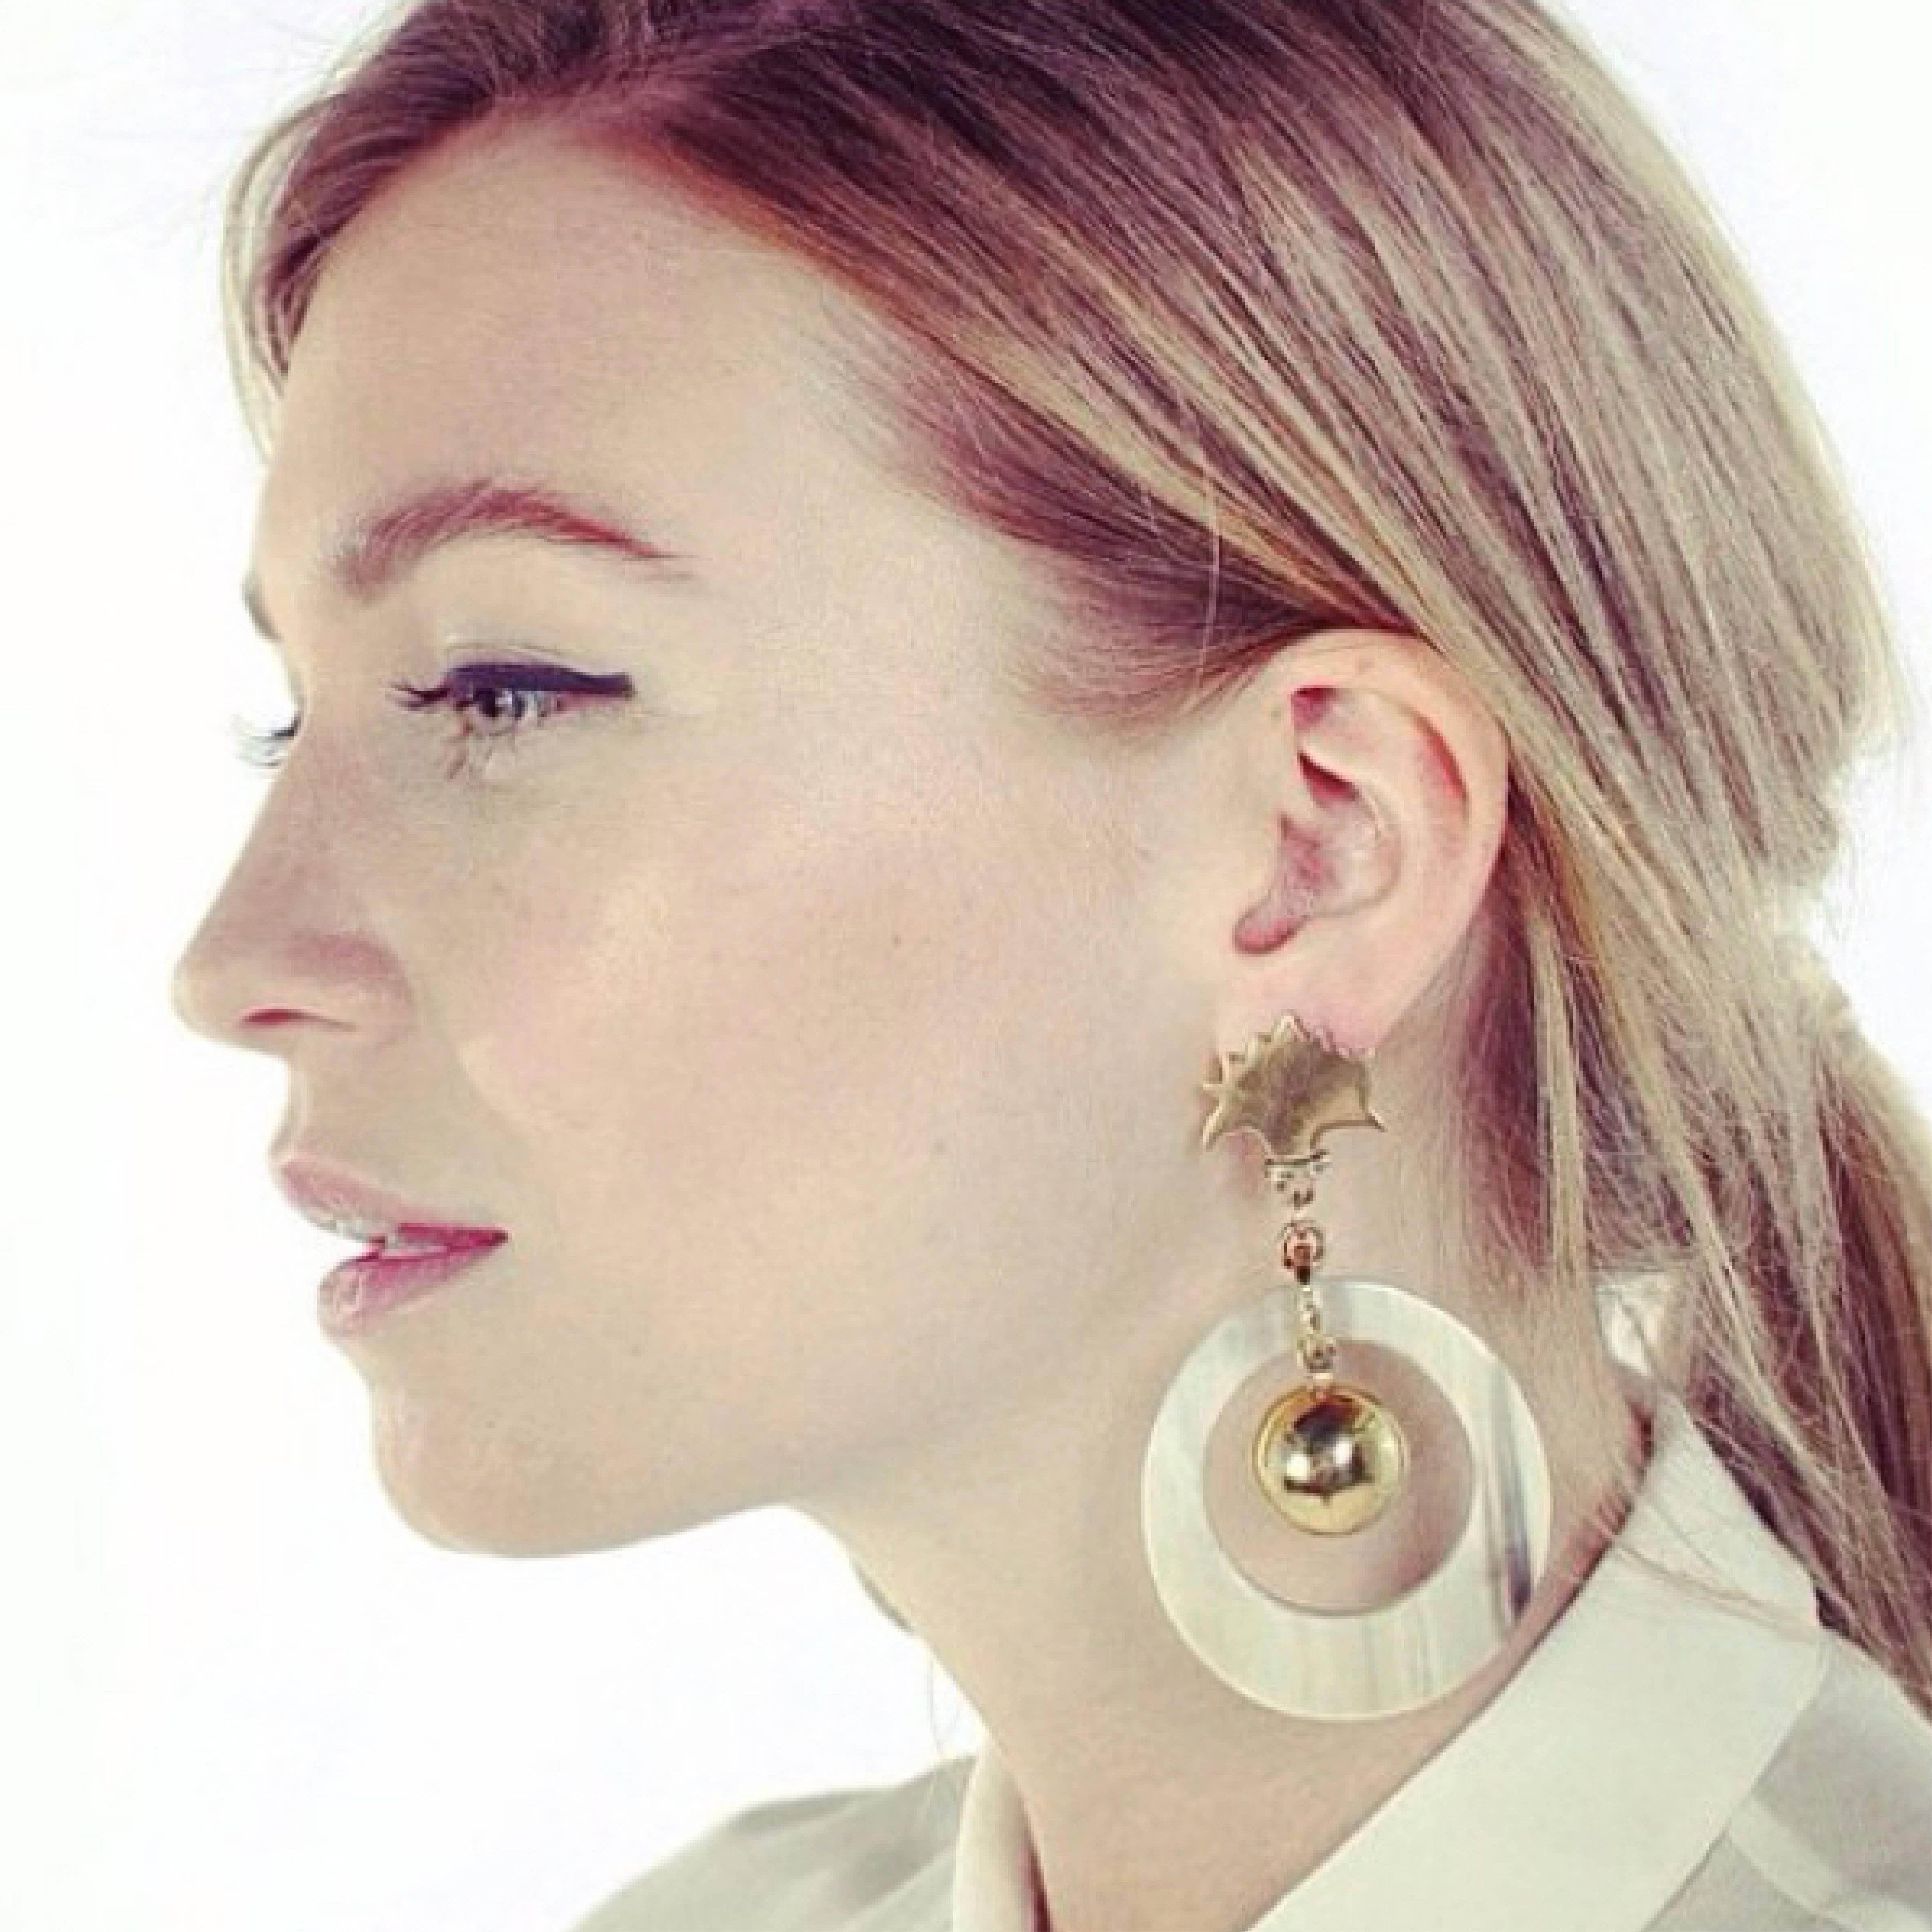 Earrings of African cow horn with art deco motif on ear. 

Fouché earrings are crafted by artisans in Kenya, East Africa, and finished by hand to the finest quality in London. As featured in Vogue. 

Earrings come pierced with solid silver